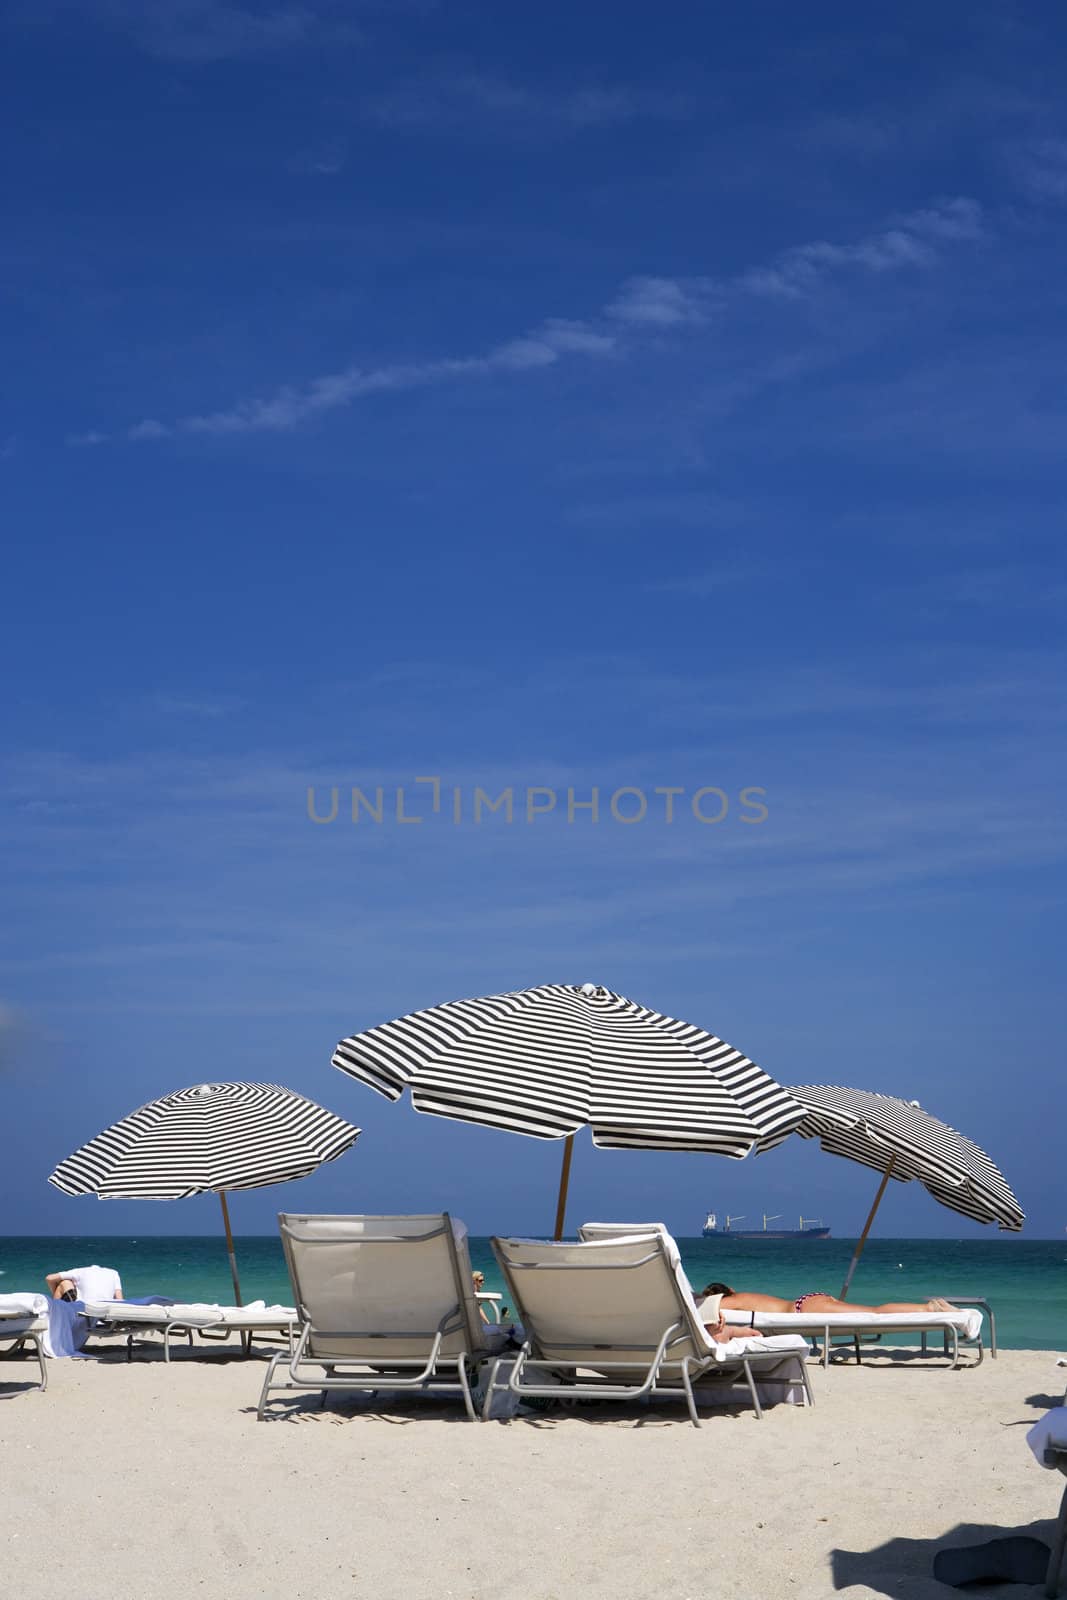 Big umbrellas are staked into the sand for beach goers in sunny Miami, Florida.